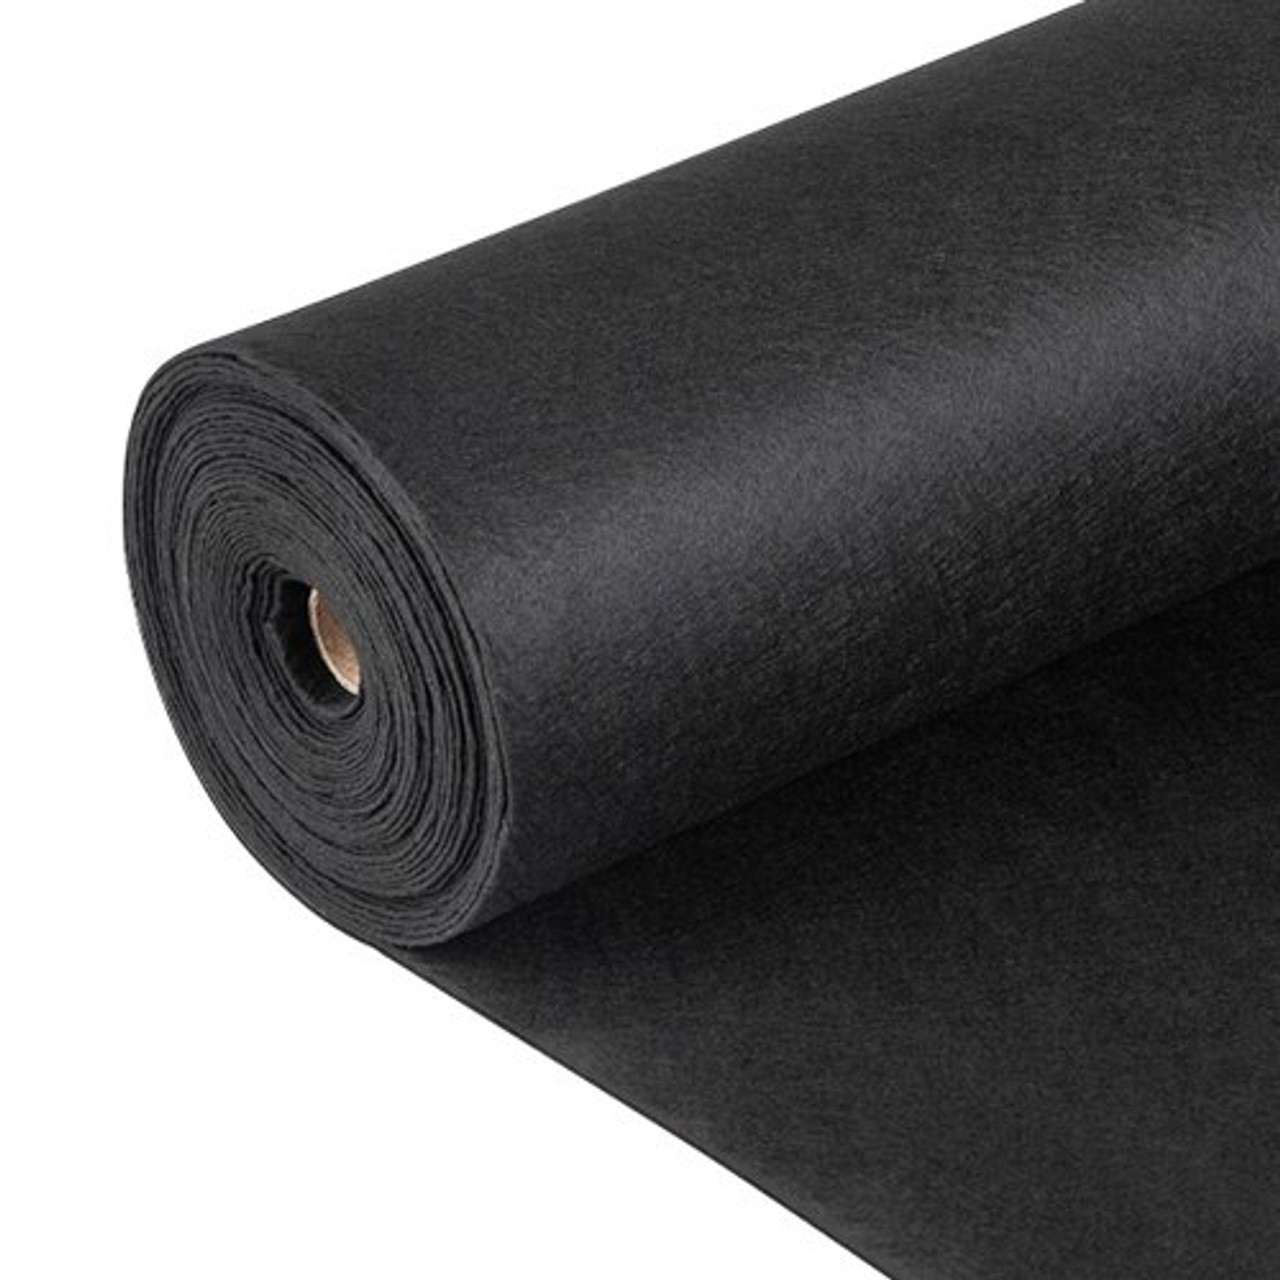 Garden Weed Barrier Fabric, 4OZ Heavy Duty Geotextile Landscape Fabric, 15ft x 20ft Non-Woven Weed Block Gardening Mat for Ground Cover, Weed Control Cloth, Landscaping, Underlayment, Black